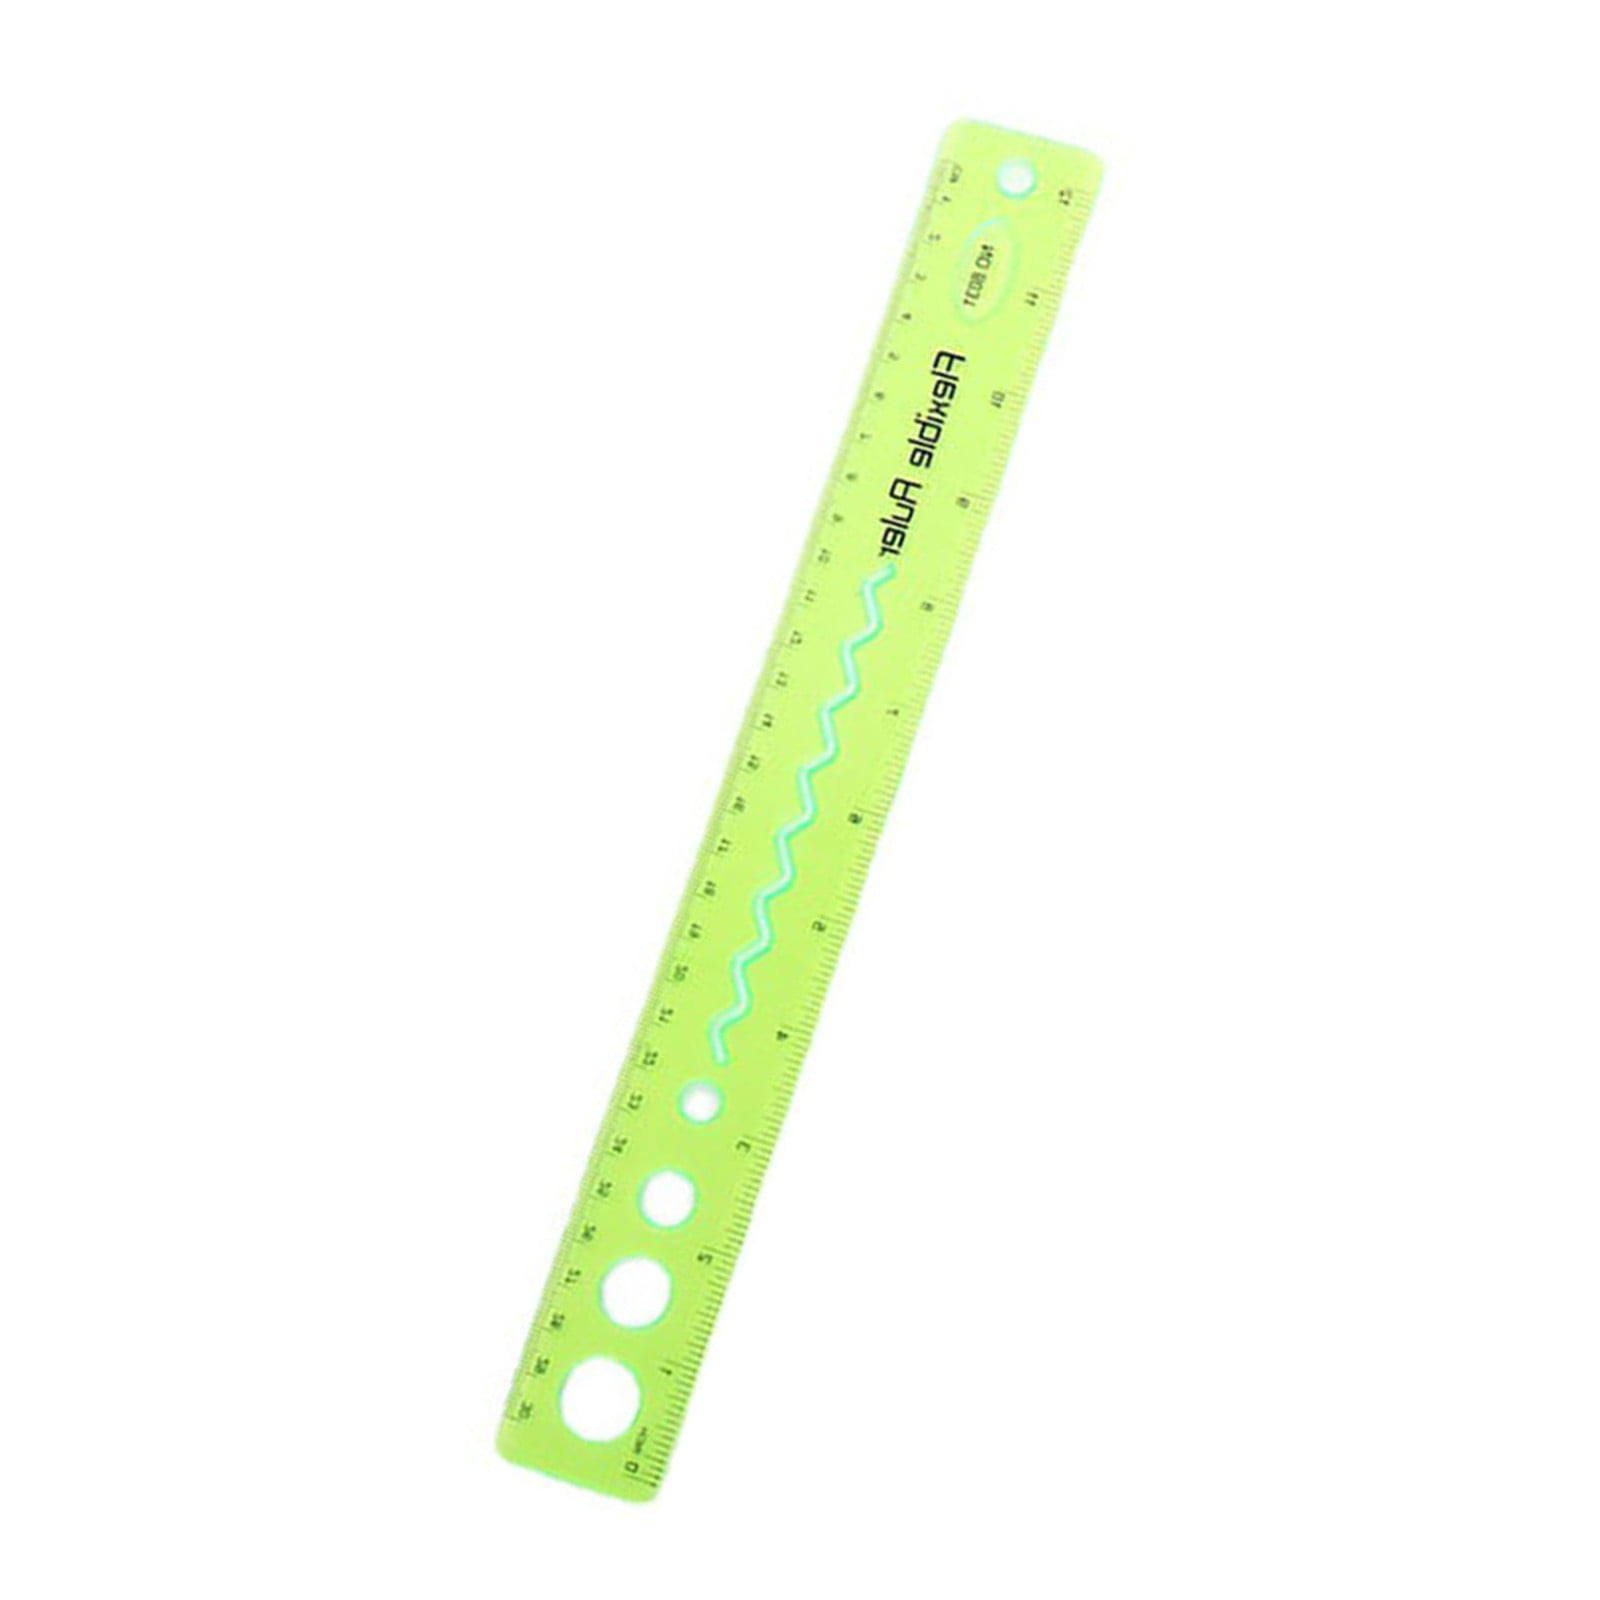 Fiada 4 Pieces Flexible Rulers 12 inch Transparent Rulers Shatterproof Plastic Ruler Straight Soft Ruler Dual Side Rulers for Student School Office